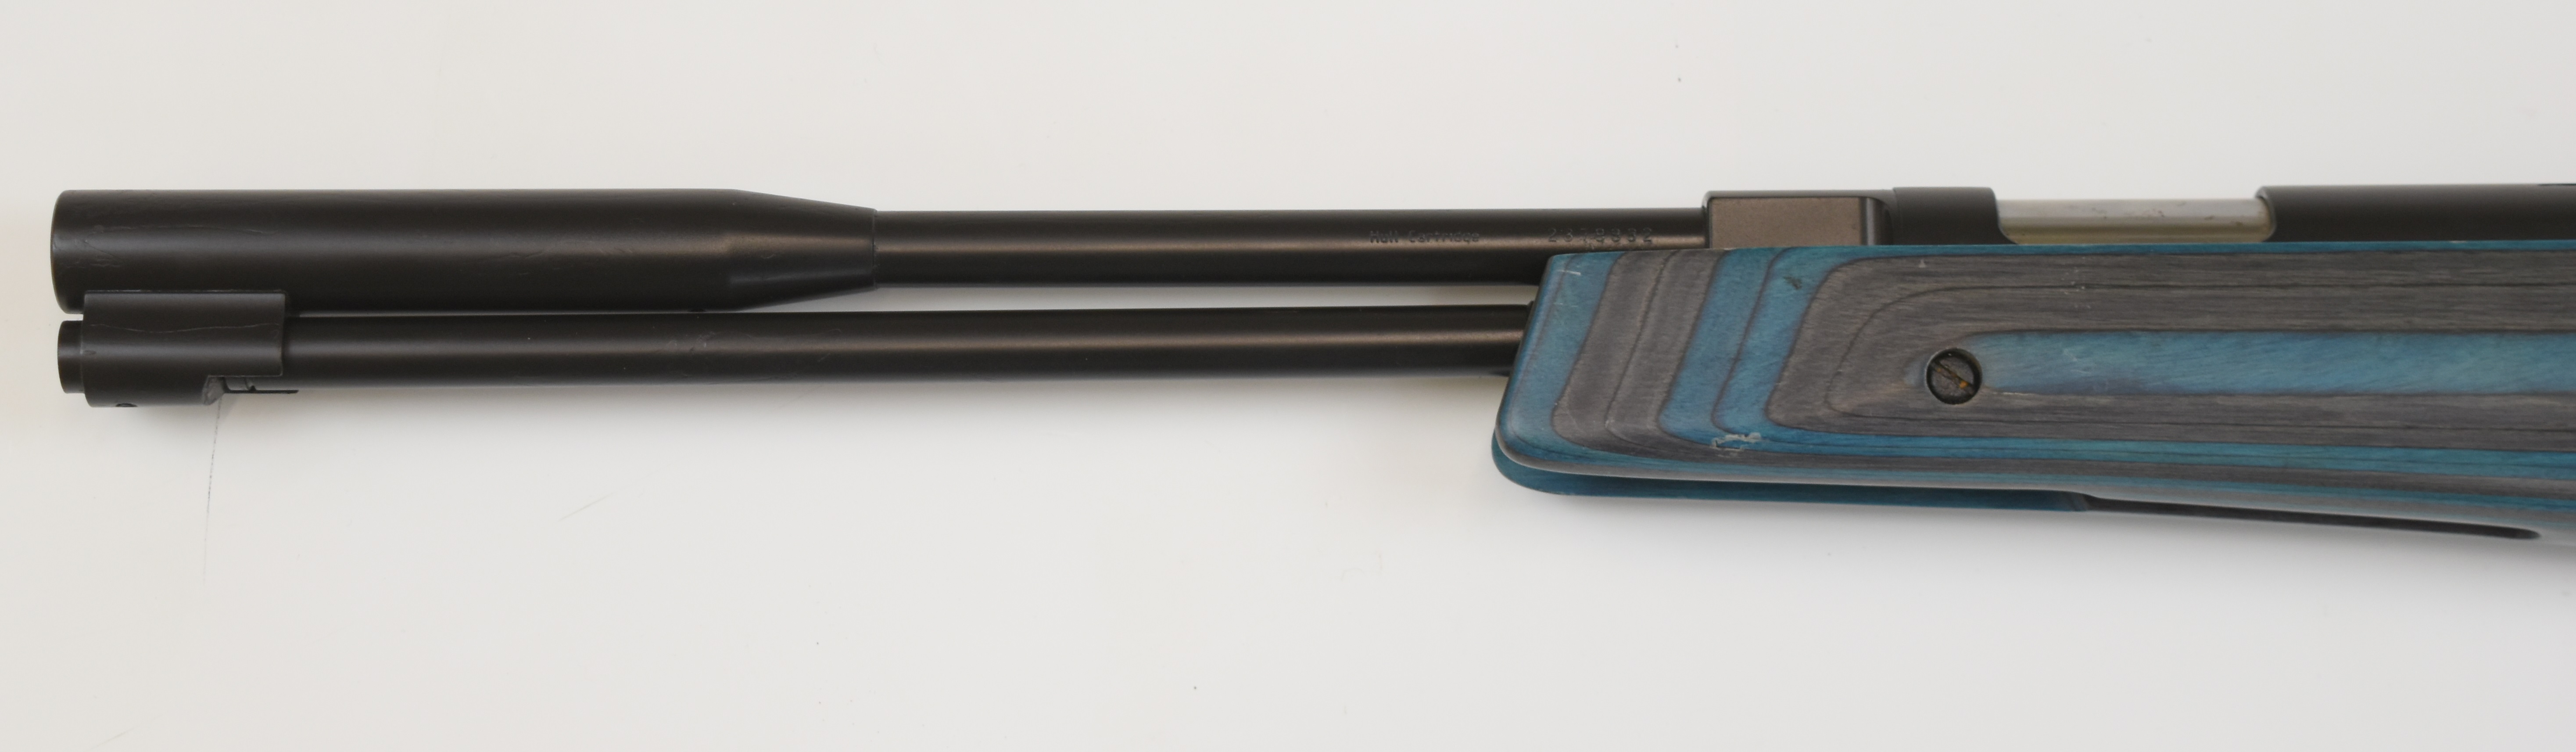 Weihrauch HW97K .177 underlever air rifle with blue laminated show wood stock, semi-pistol grip, - Image 3 of 9